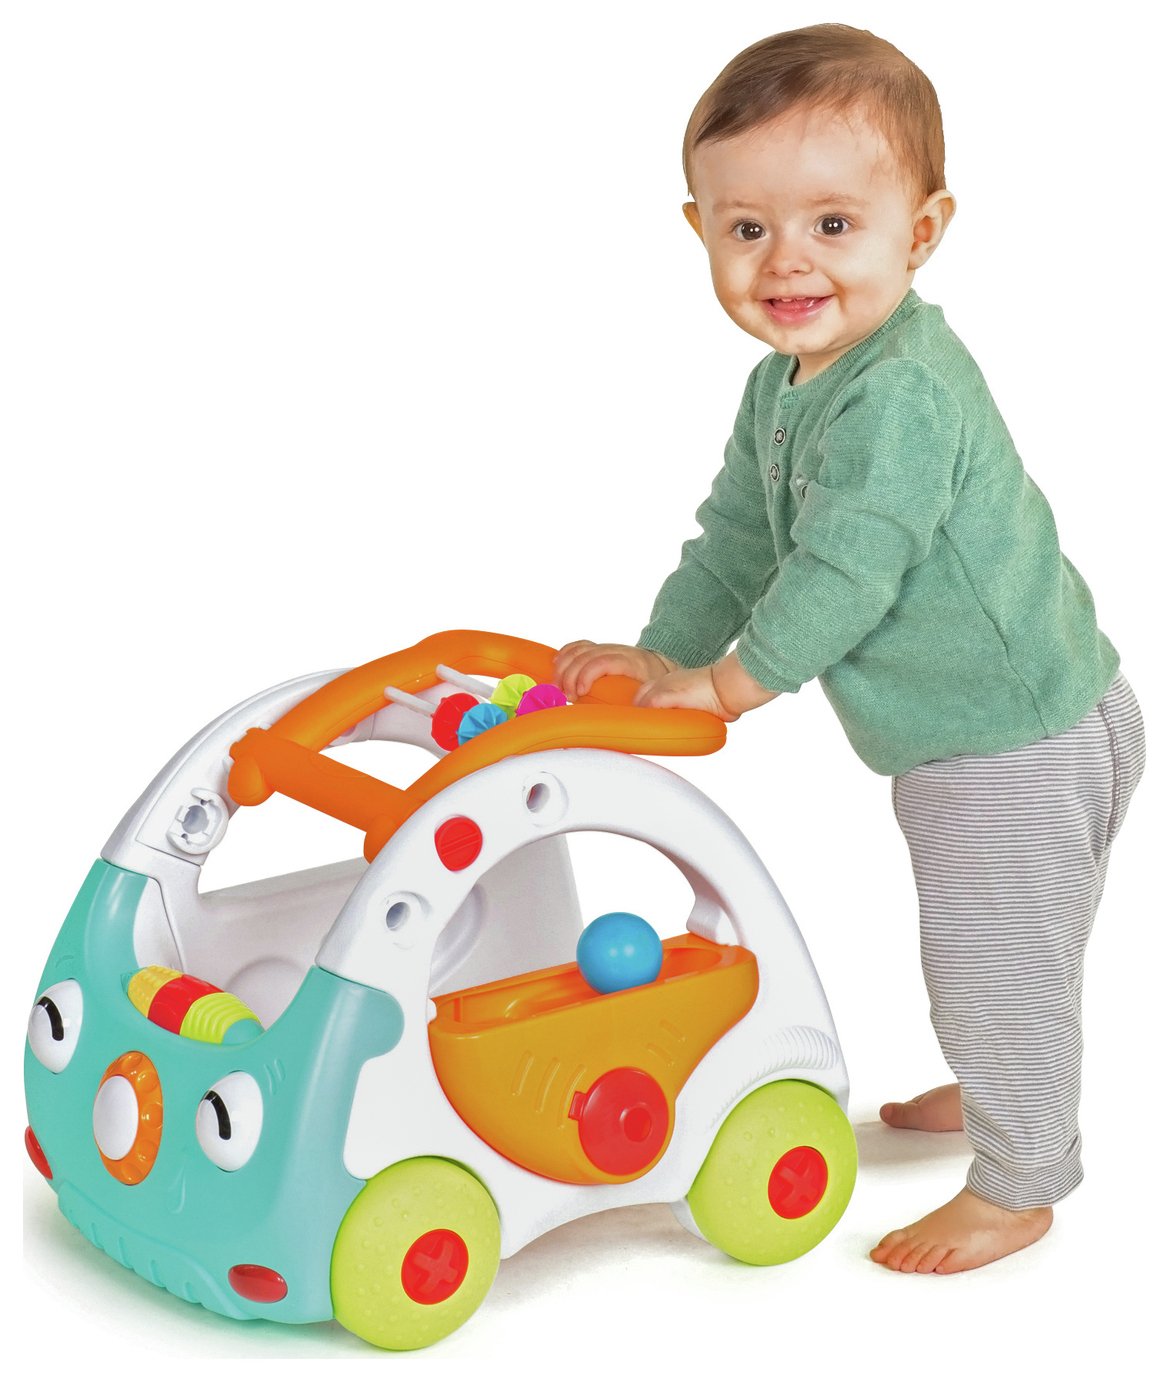 fisher price bounce and spin zebra argos